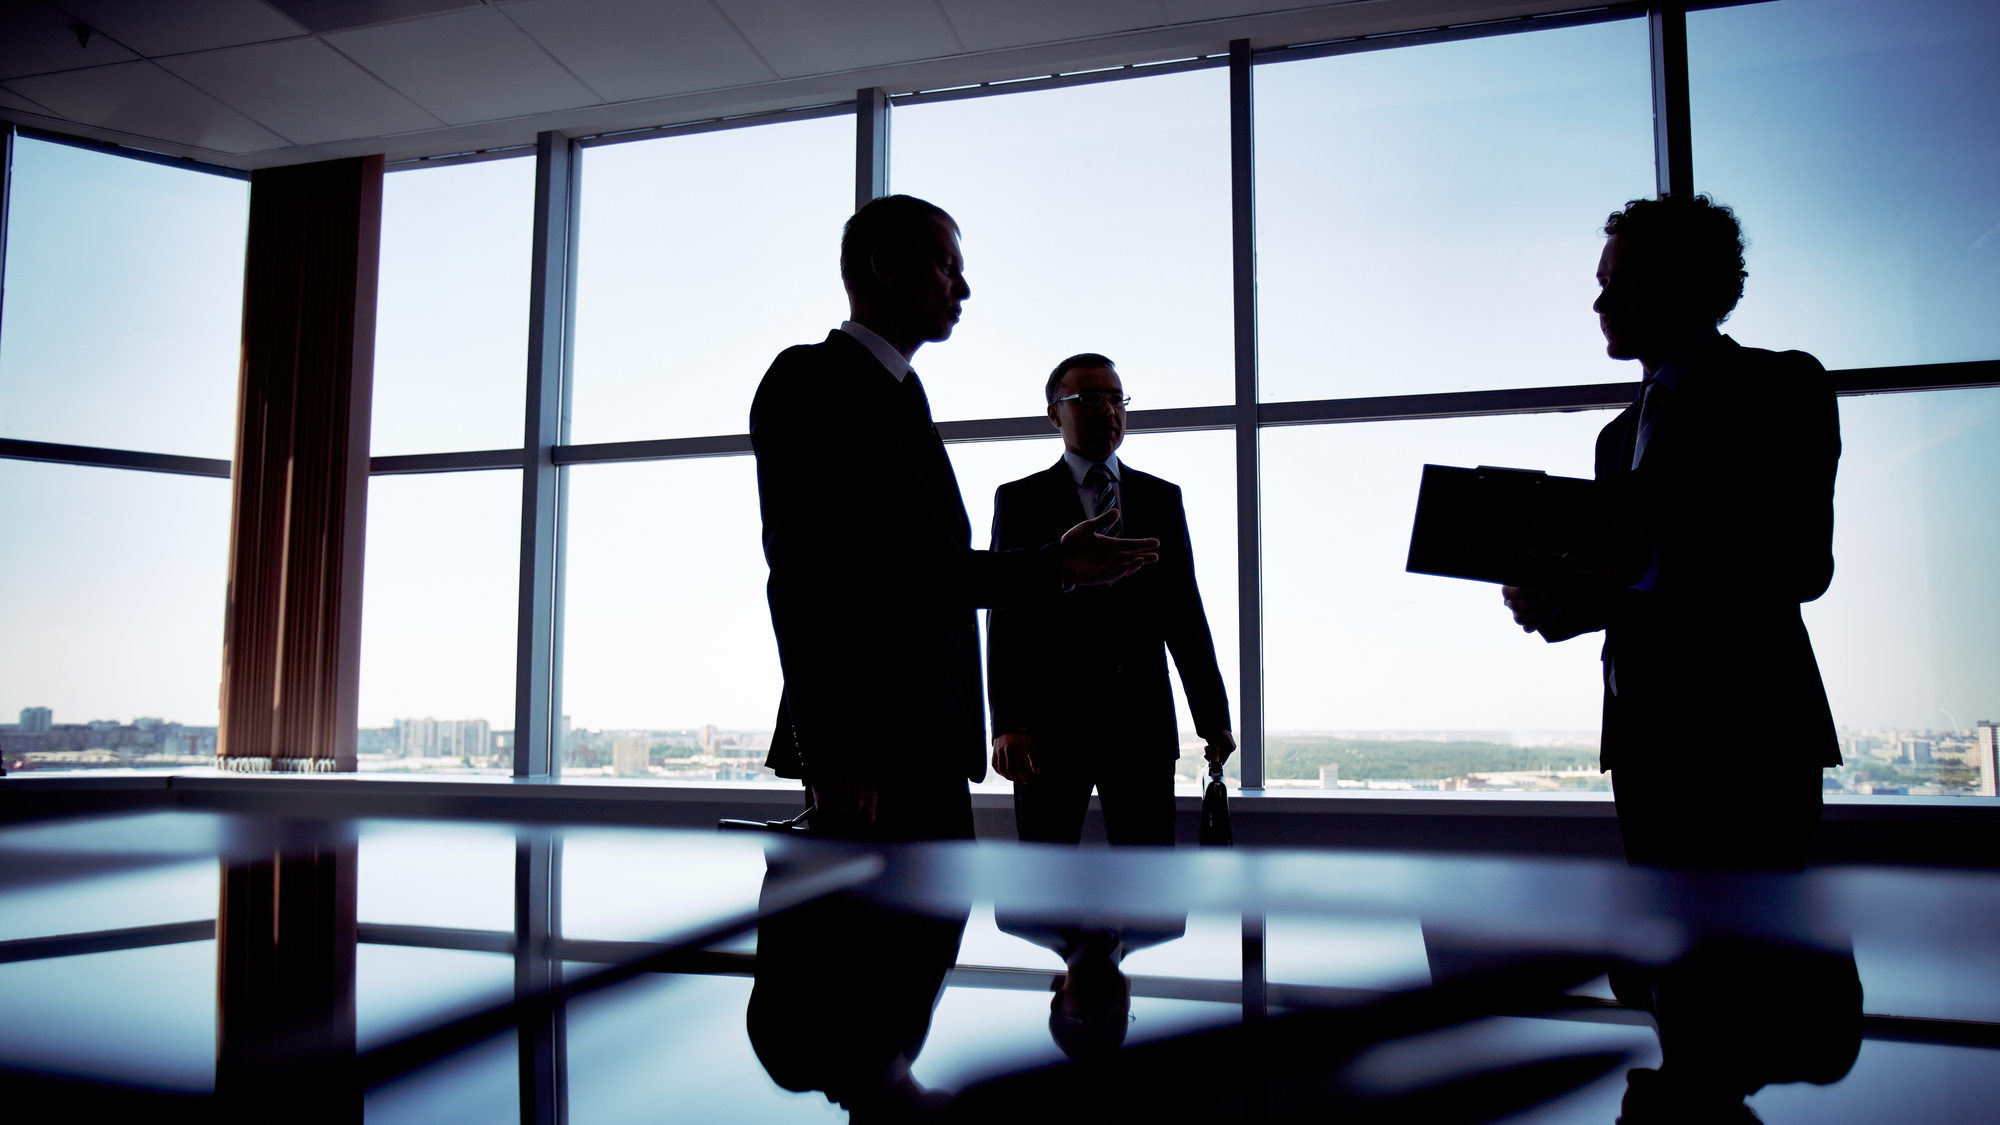 Silhouette of three business executives in high rise conference room